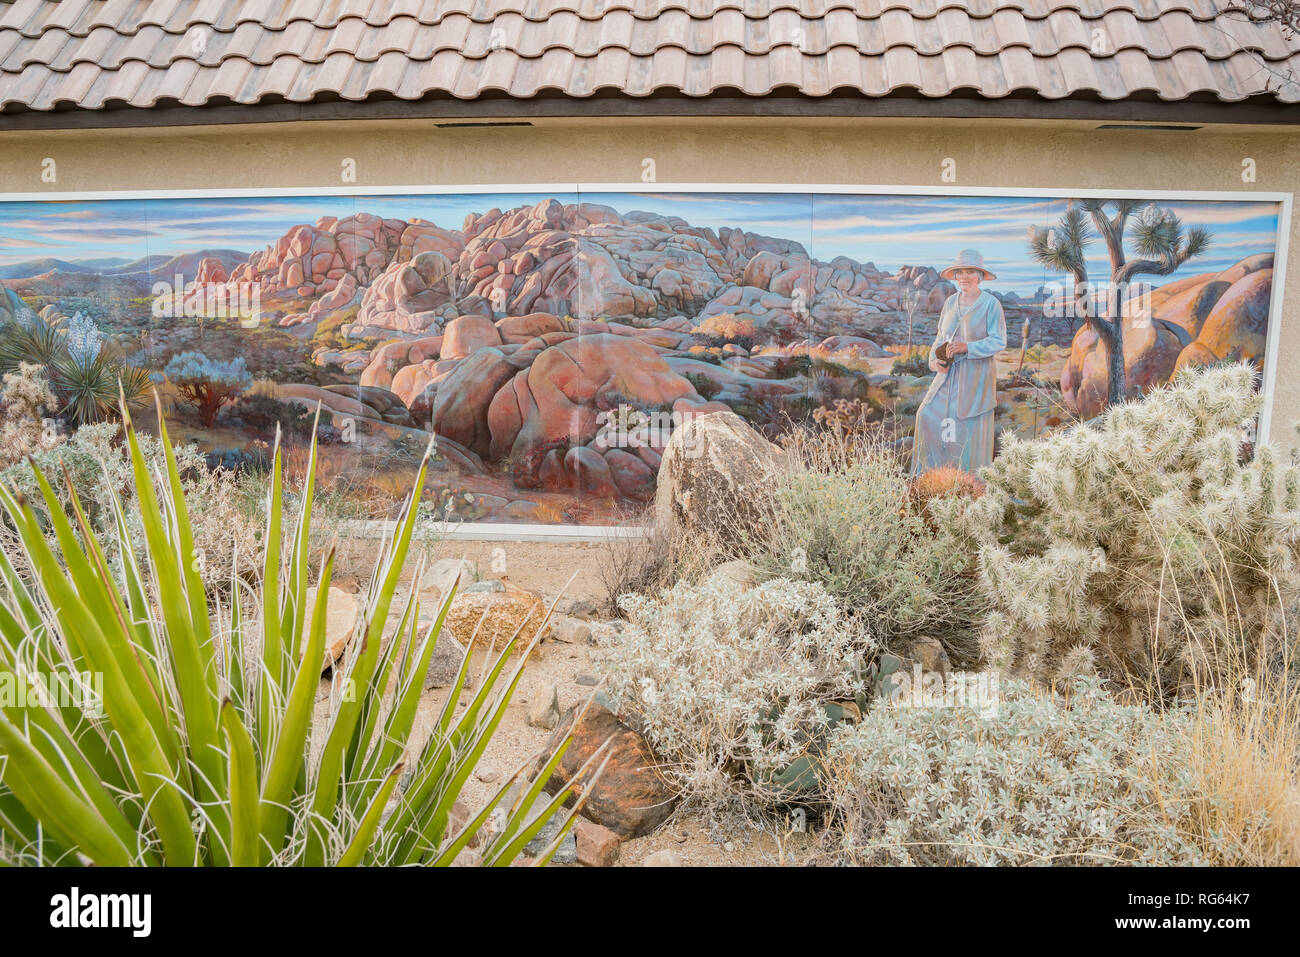 California, MAR 10: Exterior view of the Joshua Tree National Park Visitor Center on MAR 10, 2018 at California, United States Stock Photo